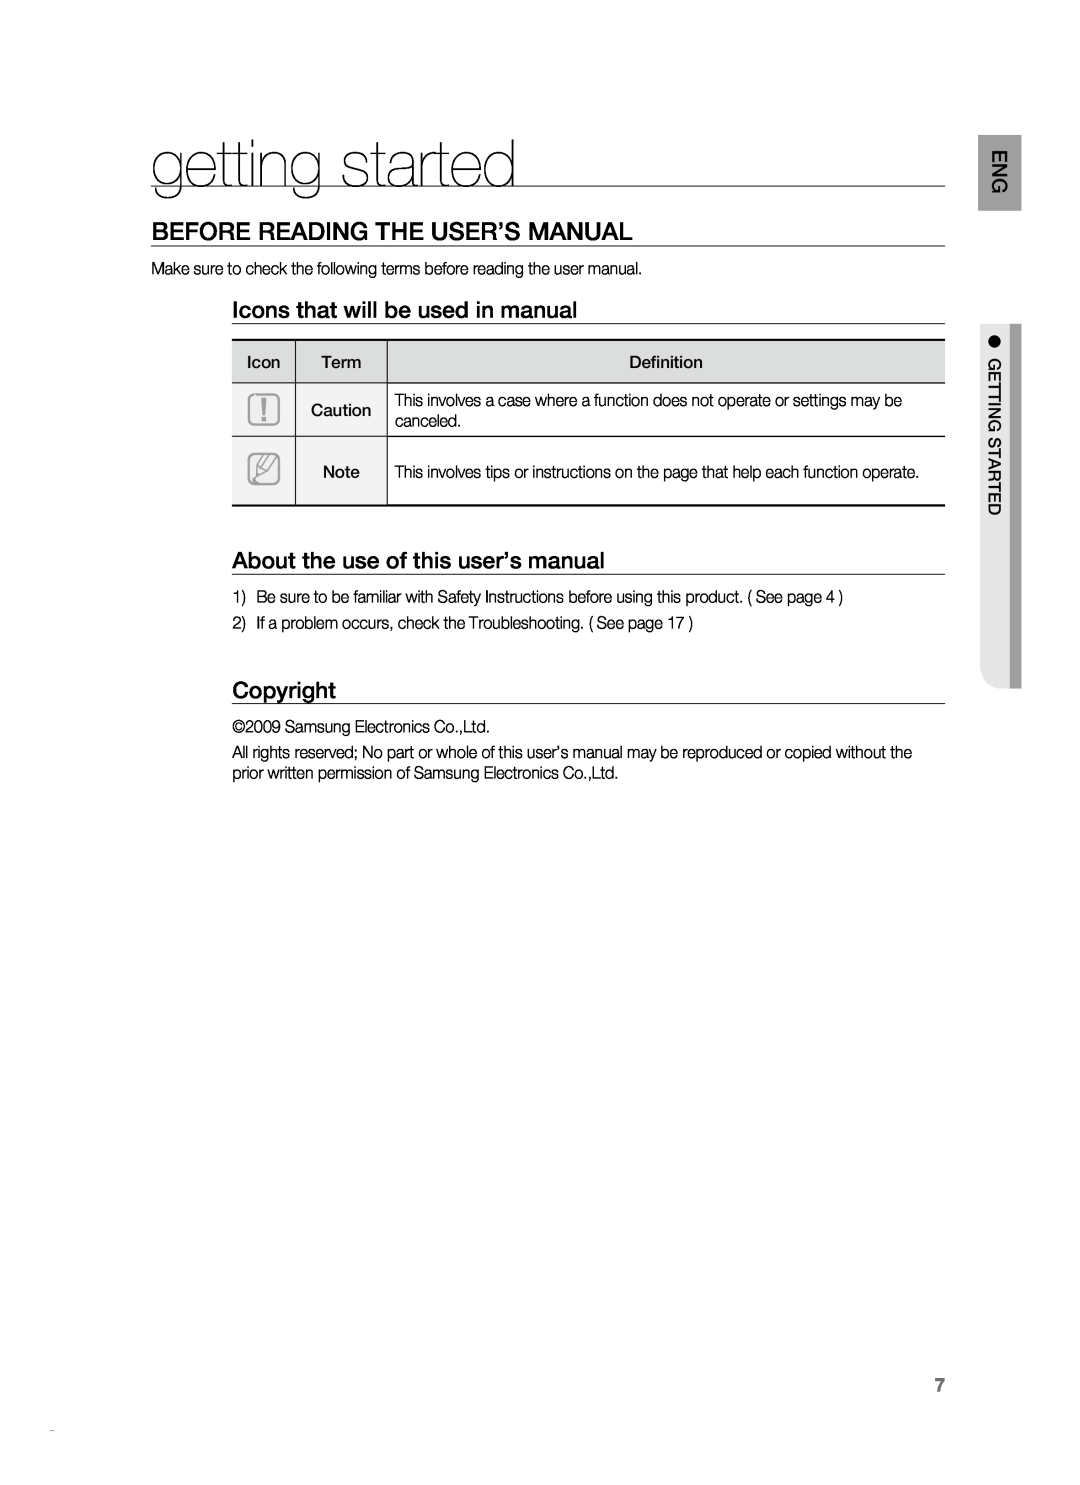 Samsung HT-WS1G, HT-WS1R, HT-SB1R, HT-SB1G user manual getting started, Icons that will be used in manual, Copyright 